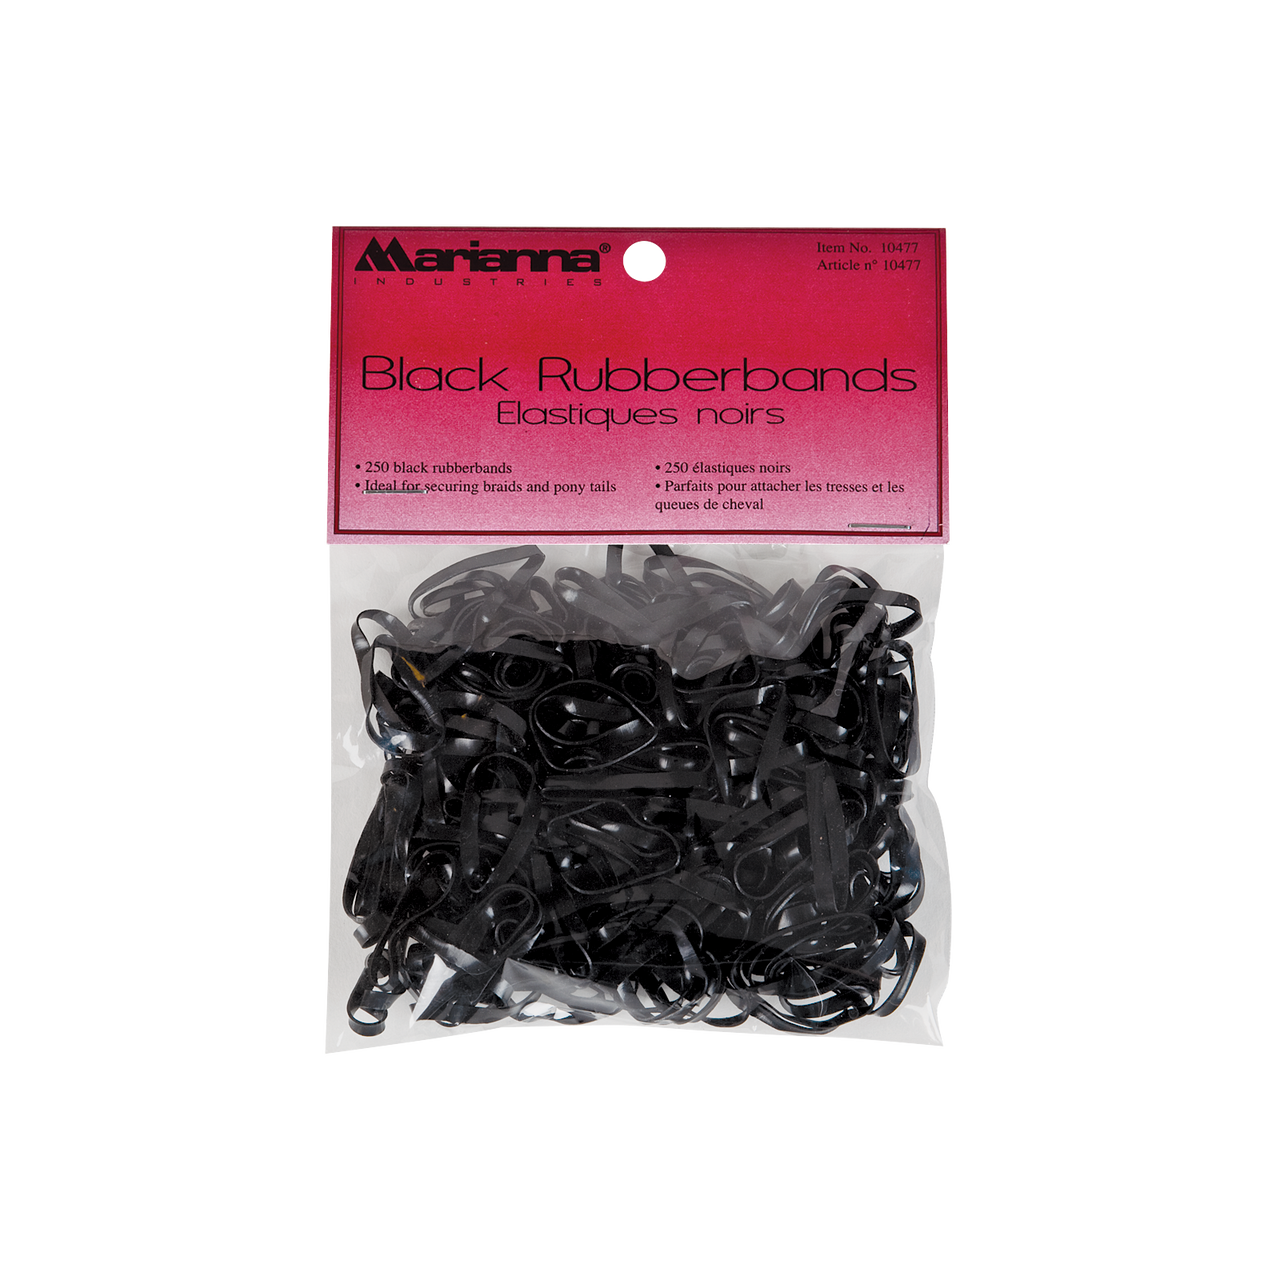 Marianna Rubber Bands, Black 250 Count